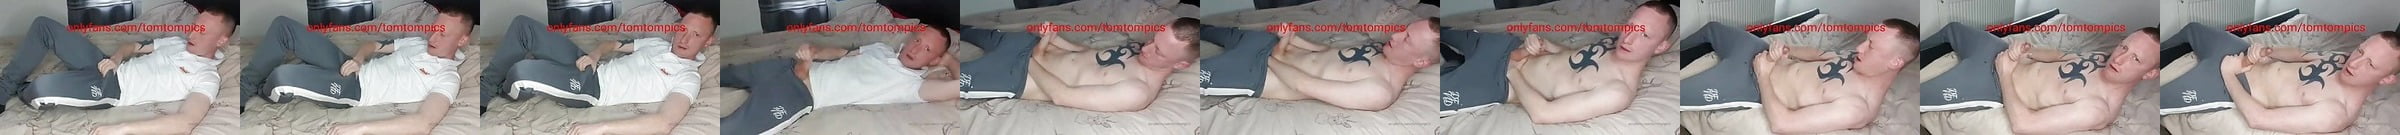 Tomtompics Gay Porn Creator Videos Free Amateur Nudes Xhamster